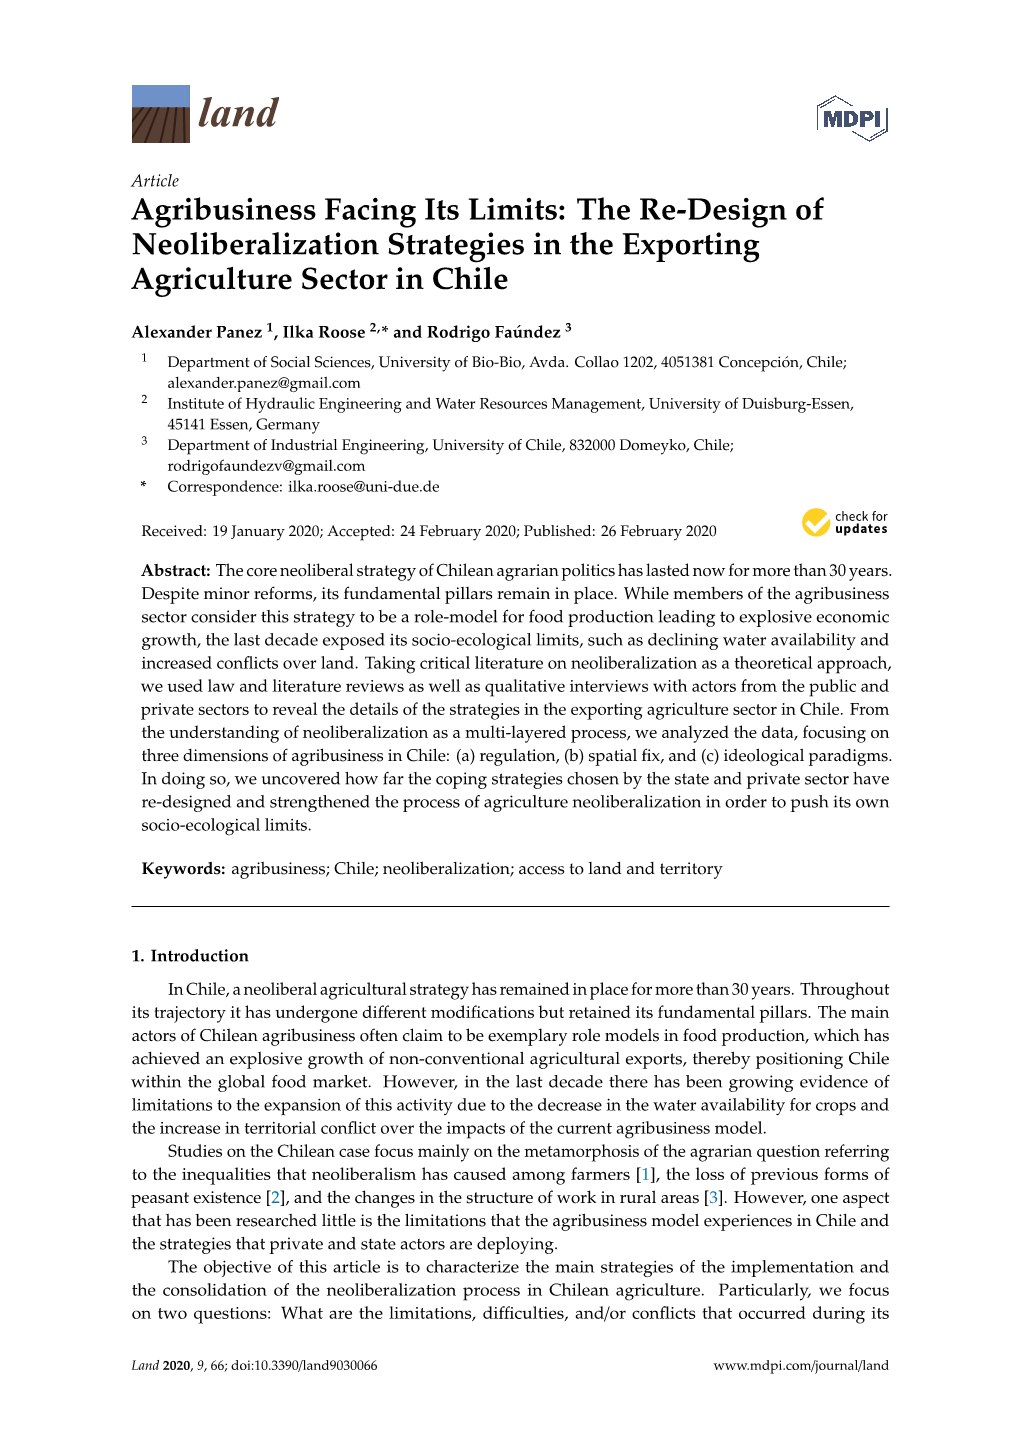 Agribusiness Facing Its Limits: the Re-Design of Neoliberalization Strategies in the Exporting Agriculture Sector in Chile